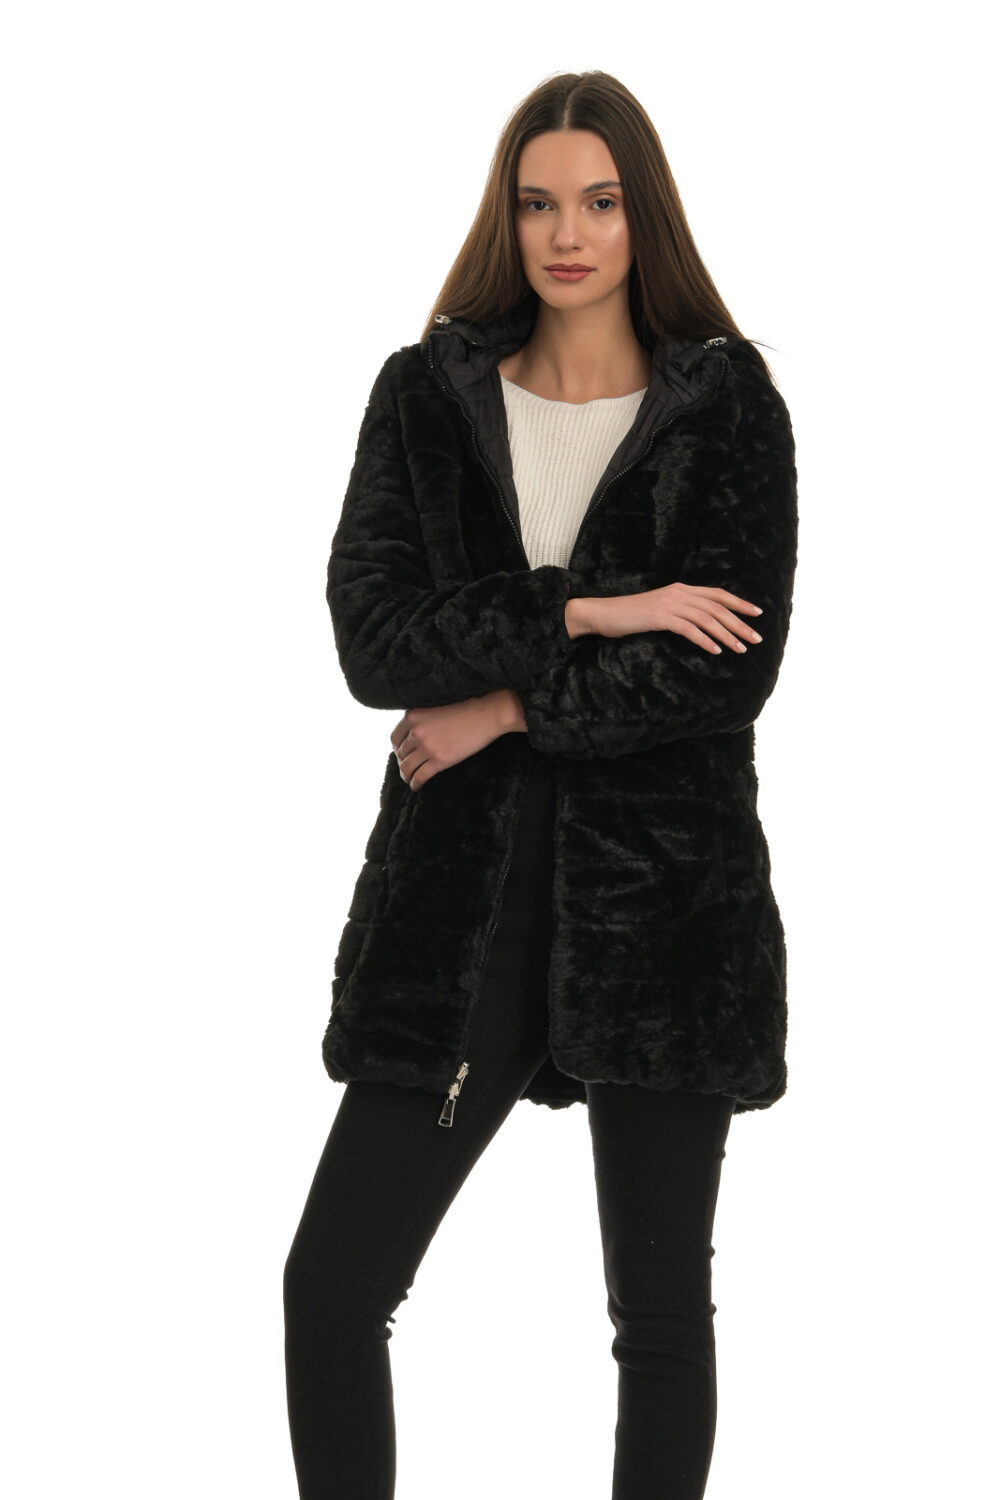 Black double-sided jacket with hood and zipper